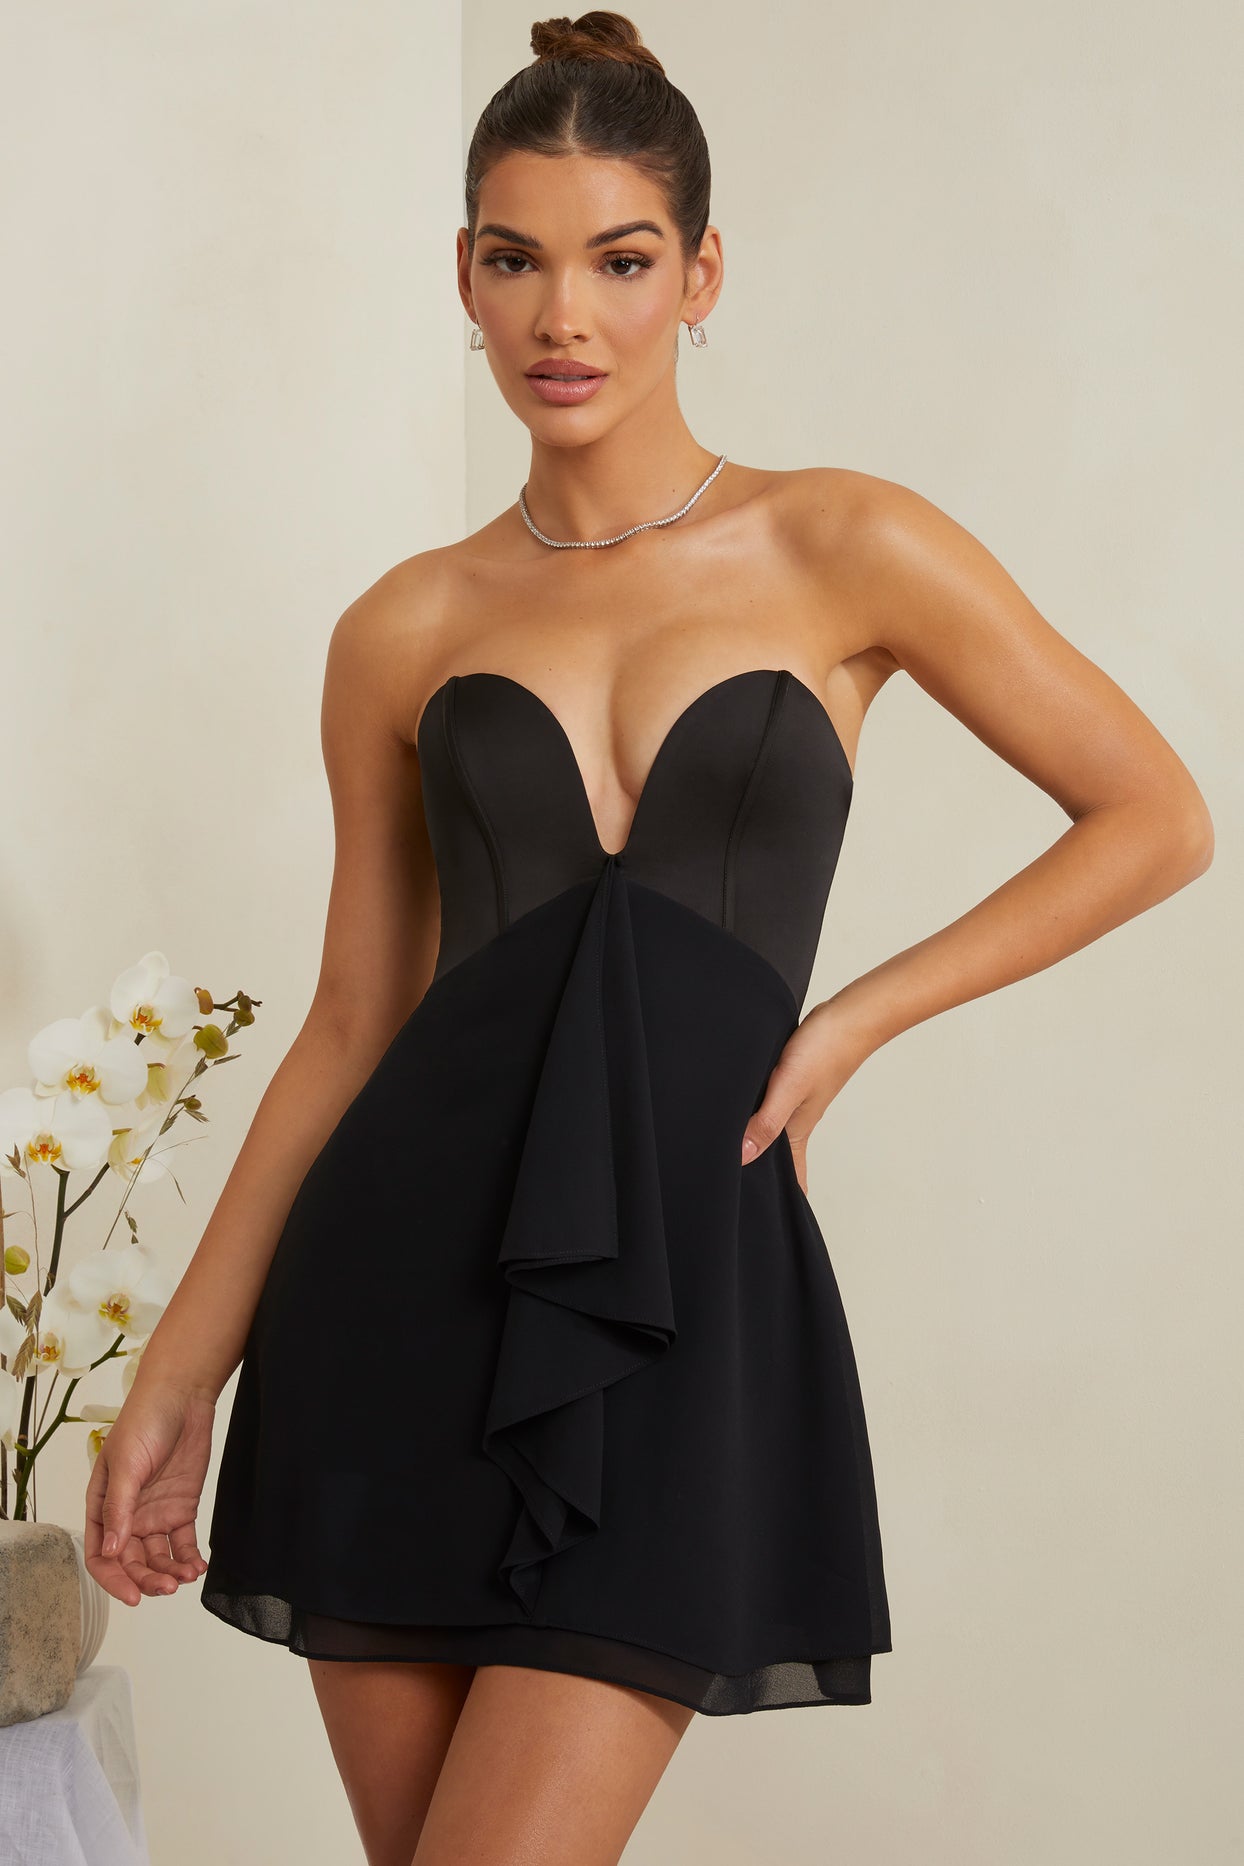 My UK My Recent Tracking Black Strapless Dress Supportive Bras